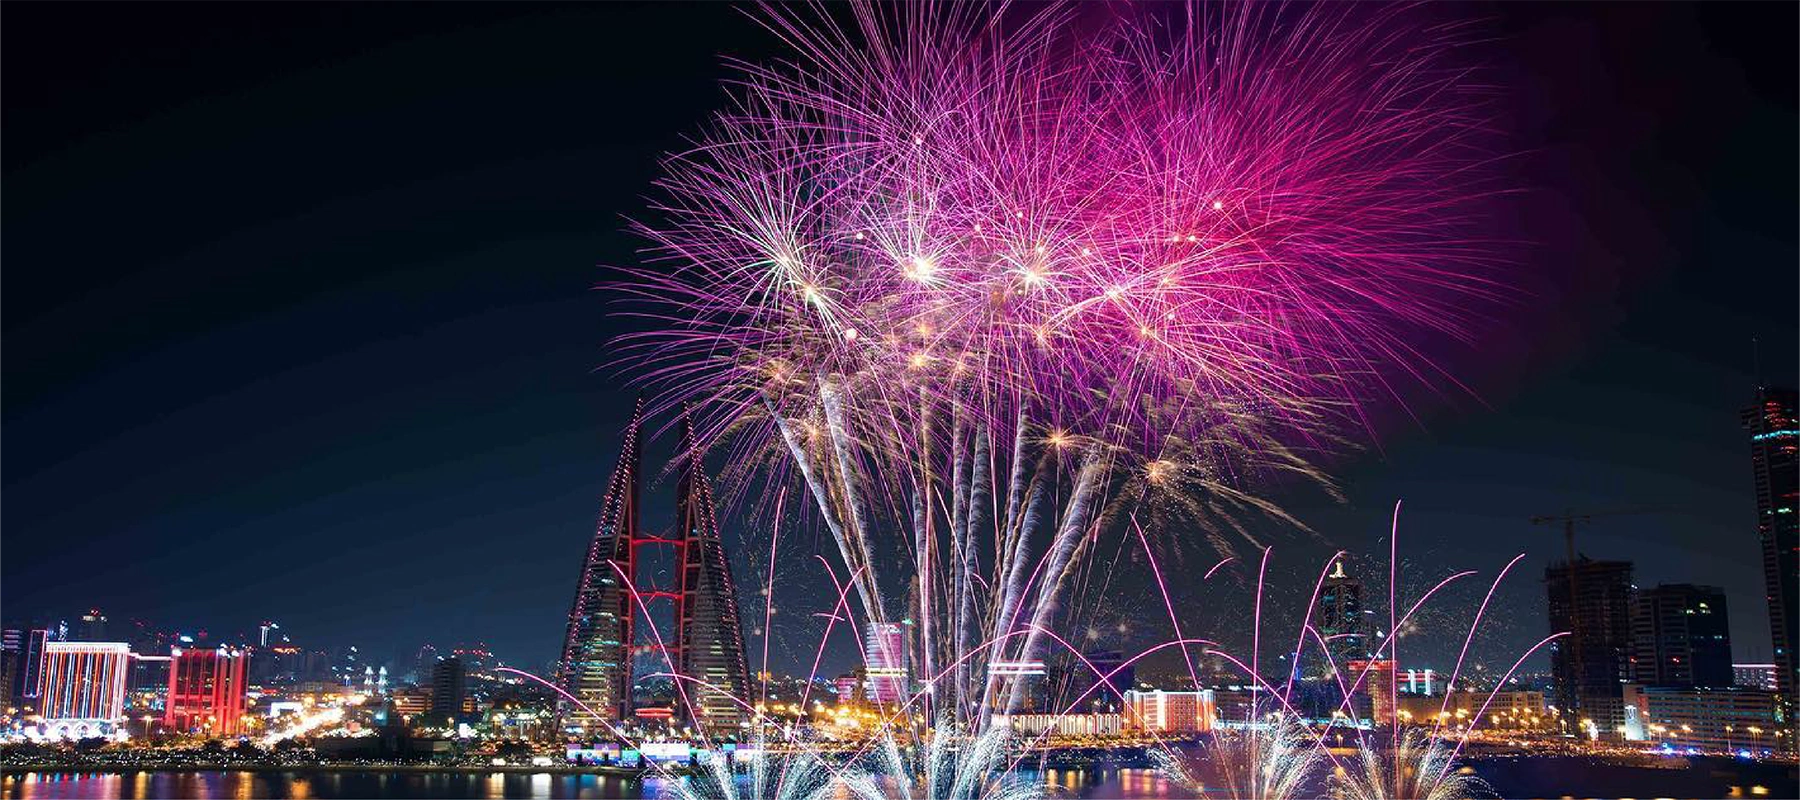 Featured image for “Explore the New Year’s Celebration in Bahrain”